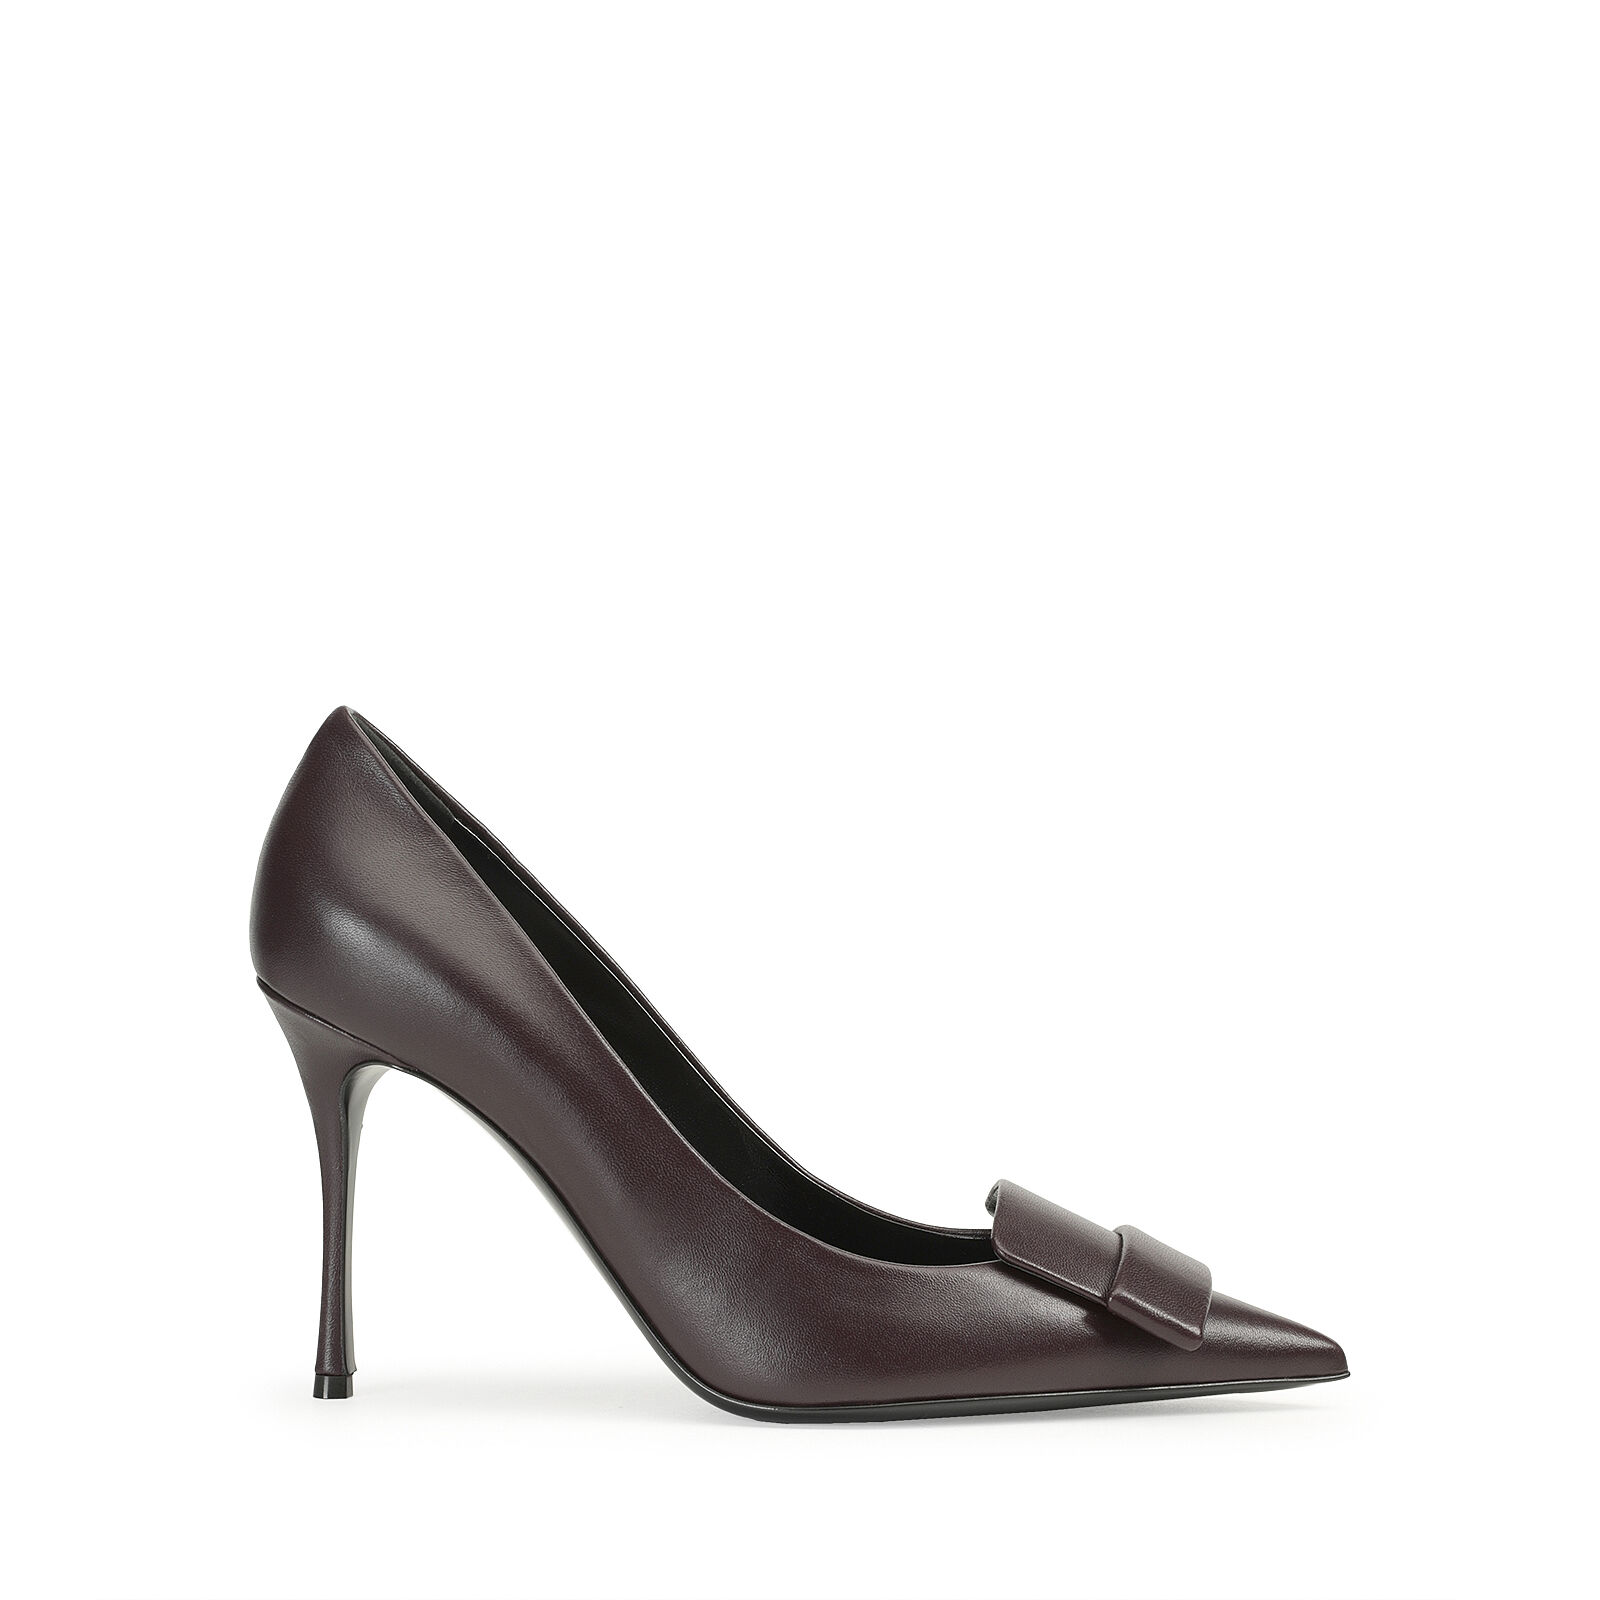 Sr1 Collection: court heels, slingback, flats and elegant slippers 